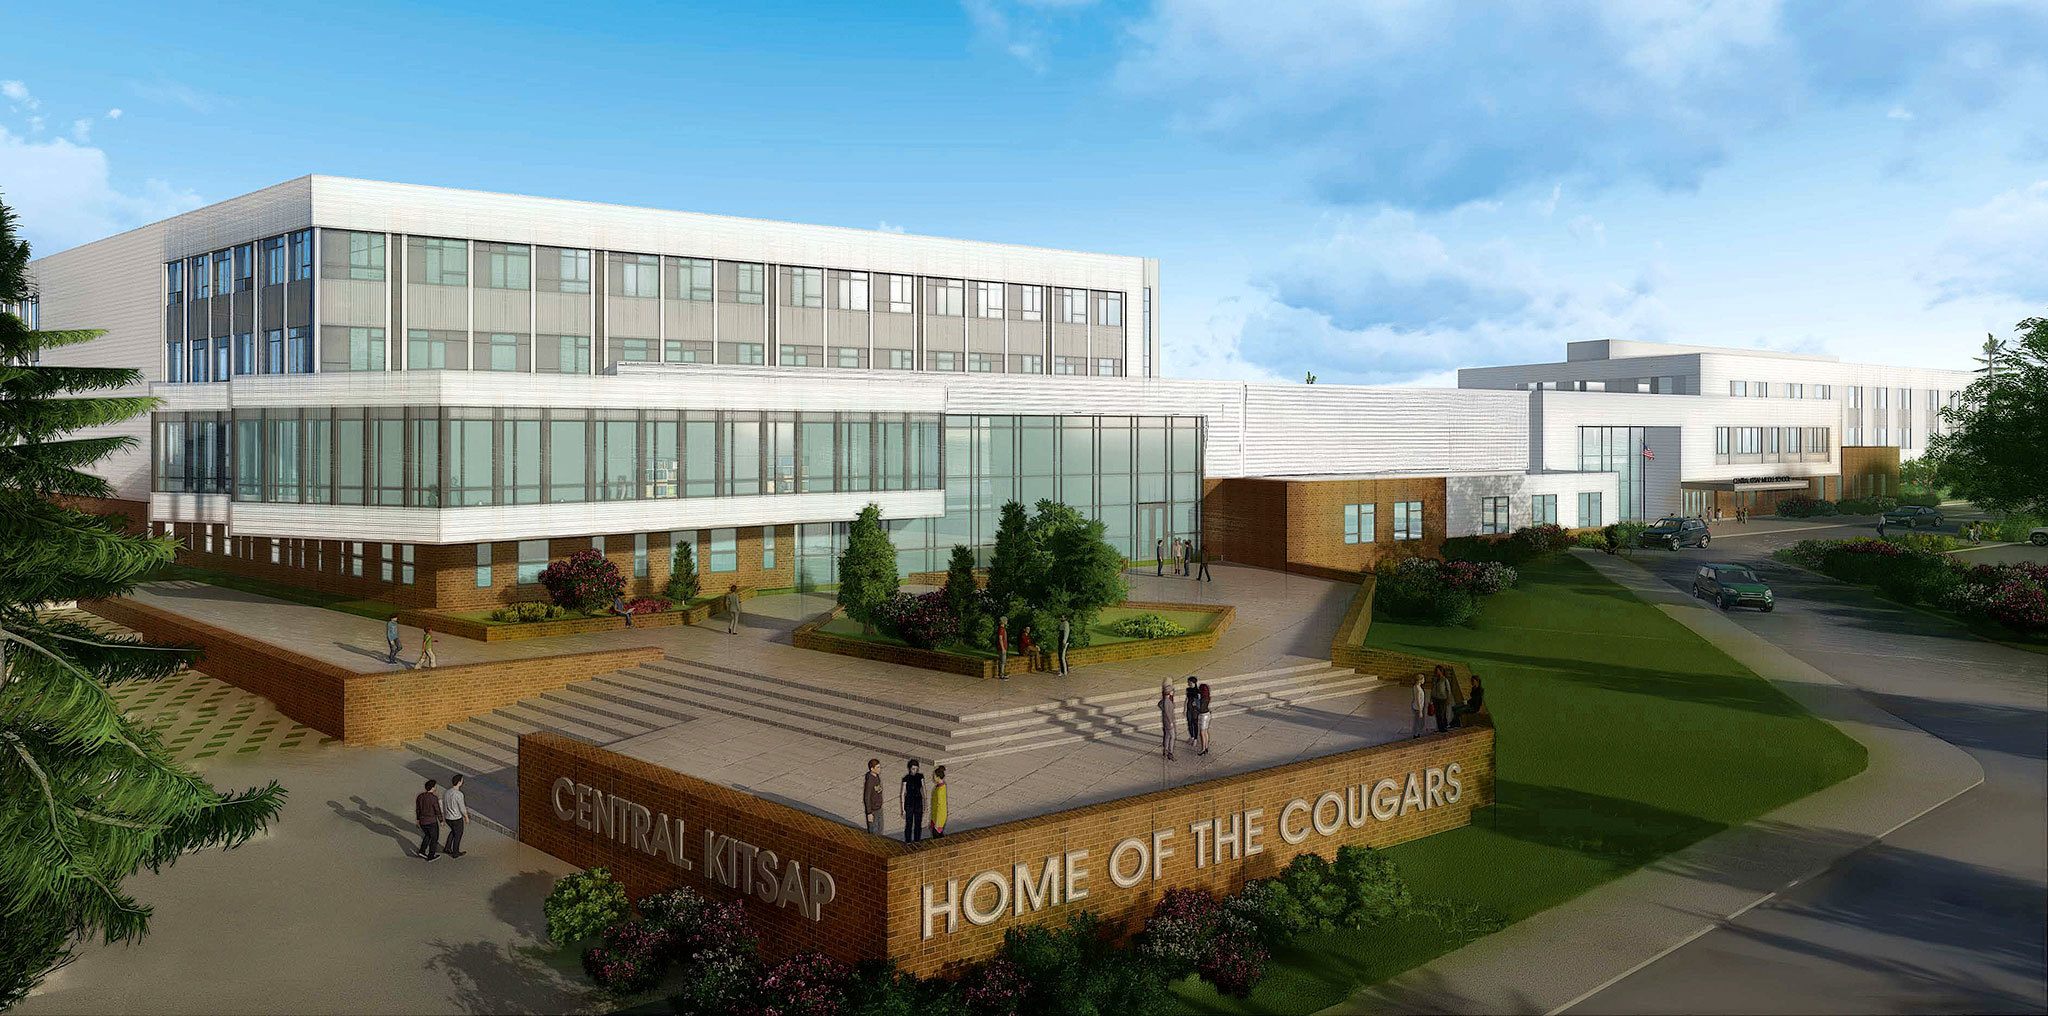 Concept art for the new Central Kitsap High School and Central Kitsap Middle School campus.                                Photo courtesy of Central Kitsap School District